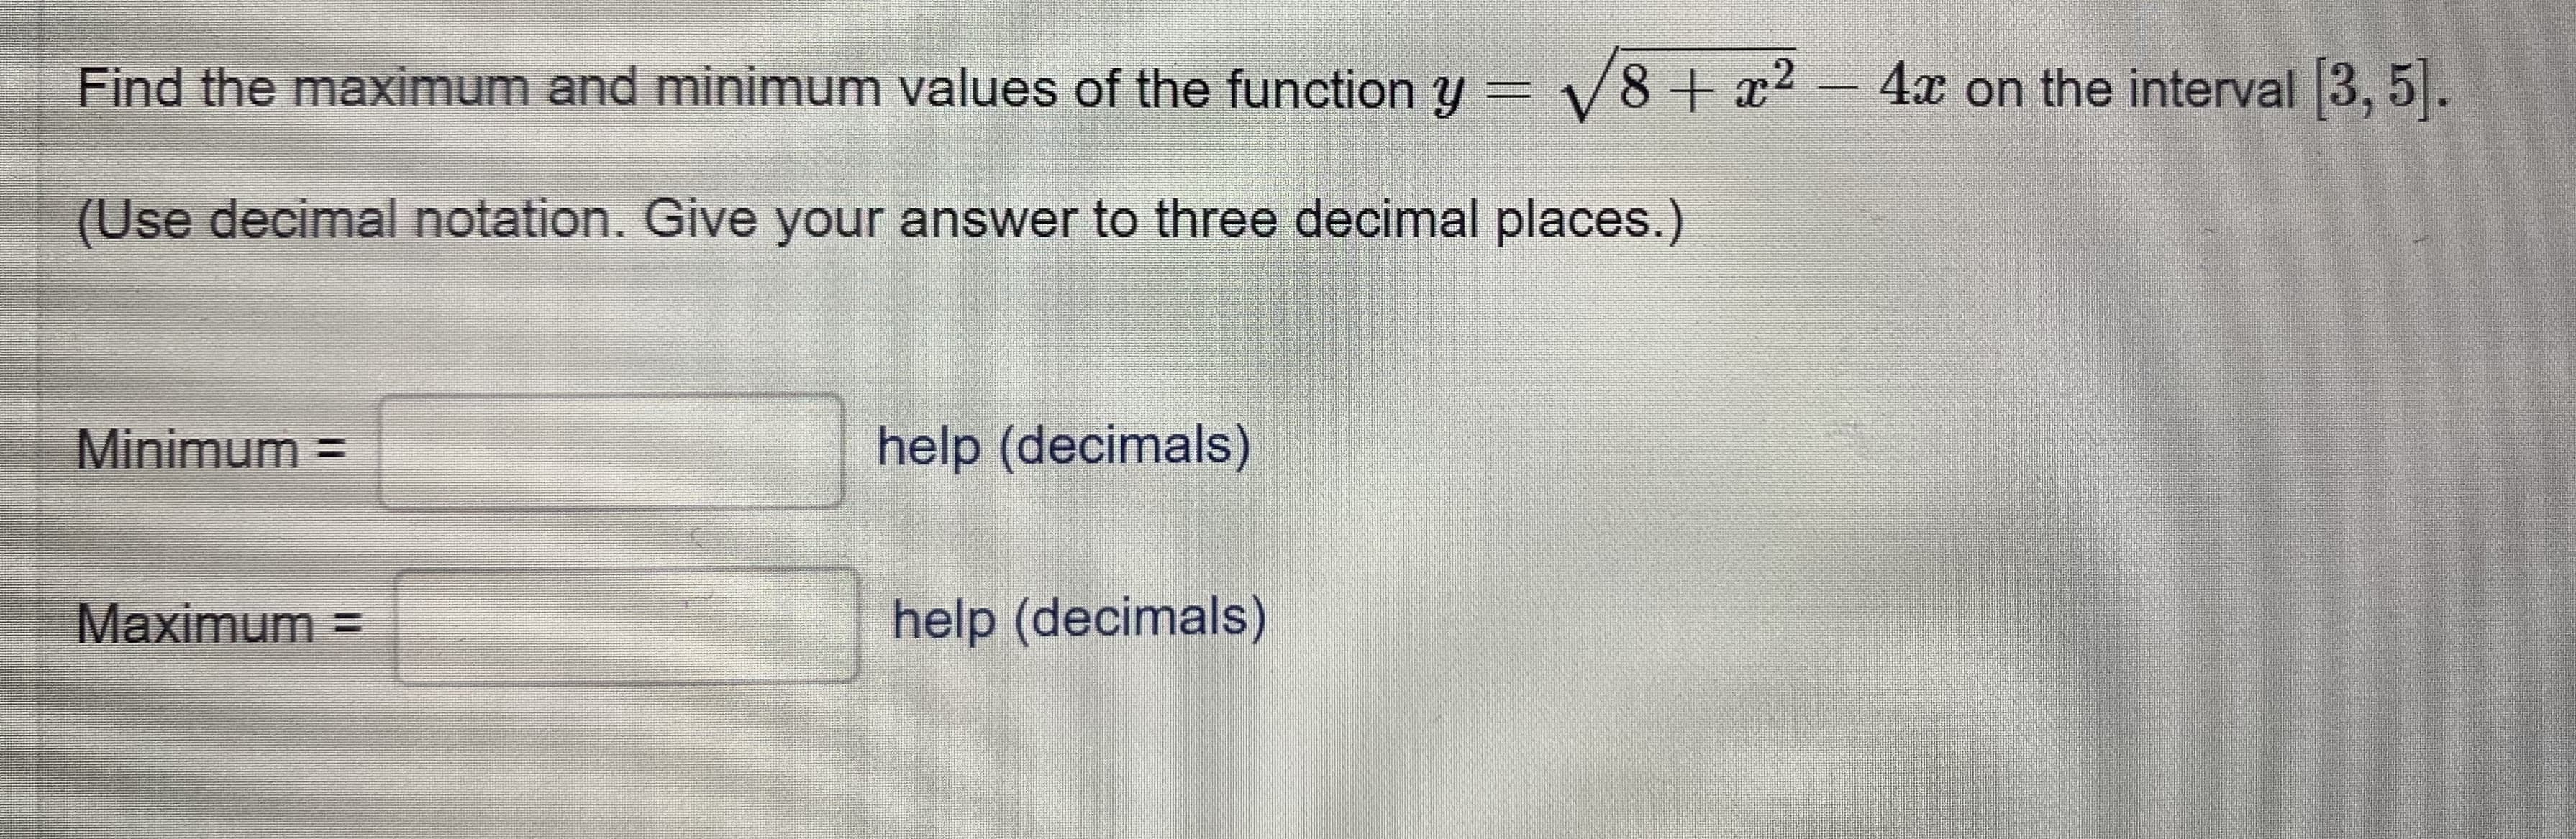 Find the maximum and minimum values of the function y = V8 + x2
- 4x on the interval 3, 5|.
(Use decimal notation. Give your answer to three decimal places.)
